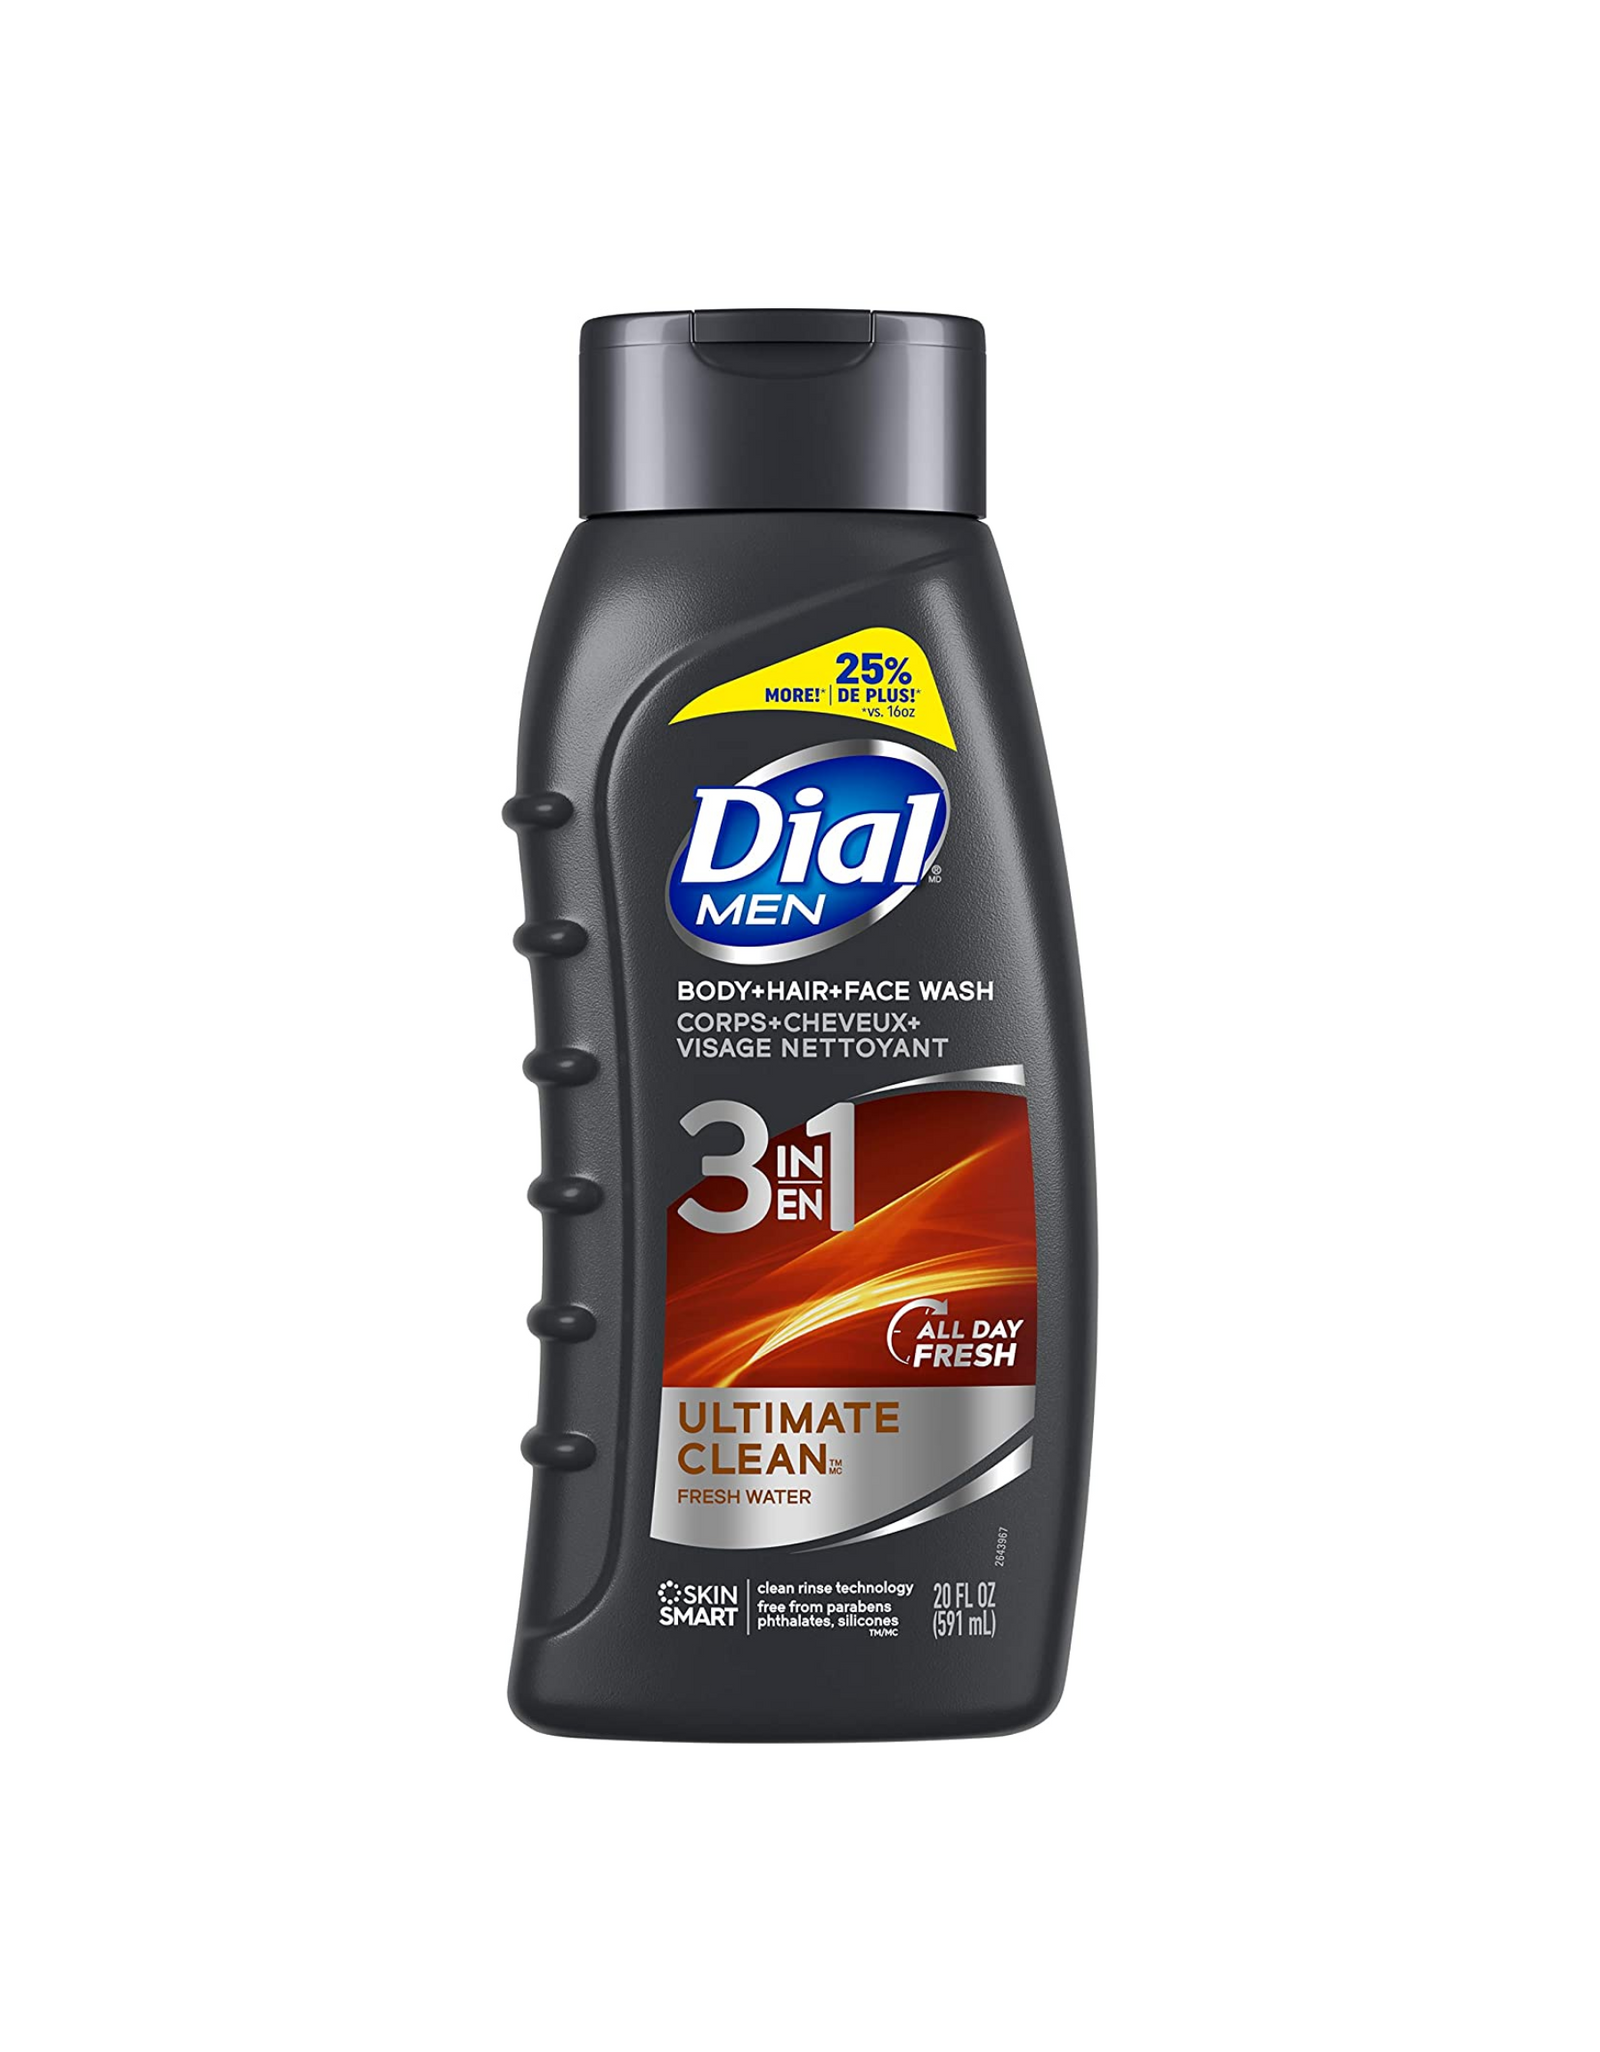 Dial Men 3in1 Body, Hair and Face Wash, Ultimate Clean, Fresh All Day, 20 fl oz (Pack of 4)